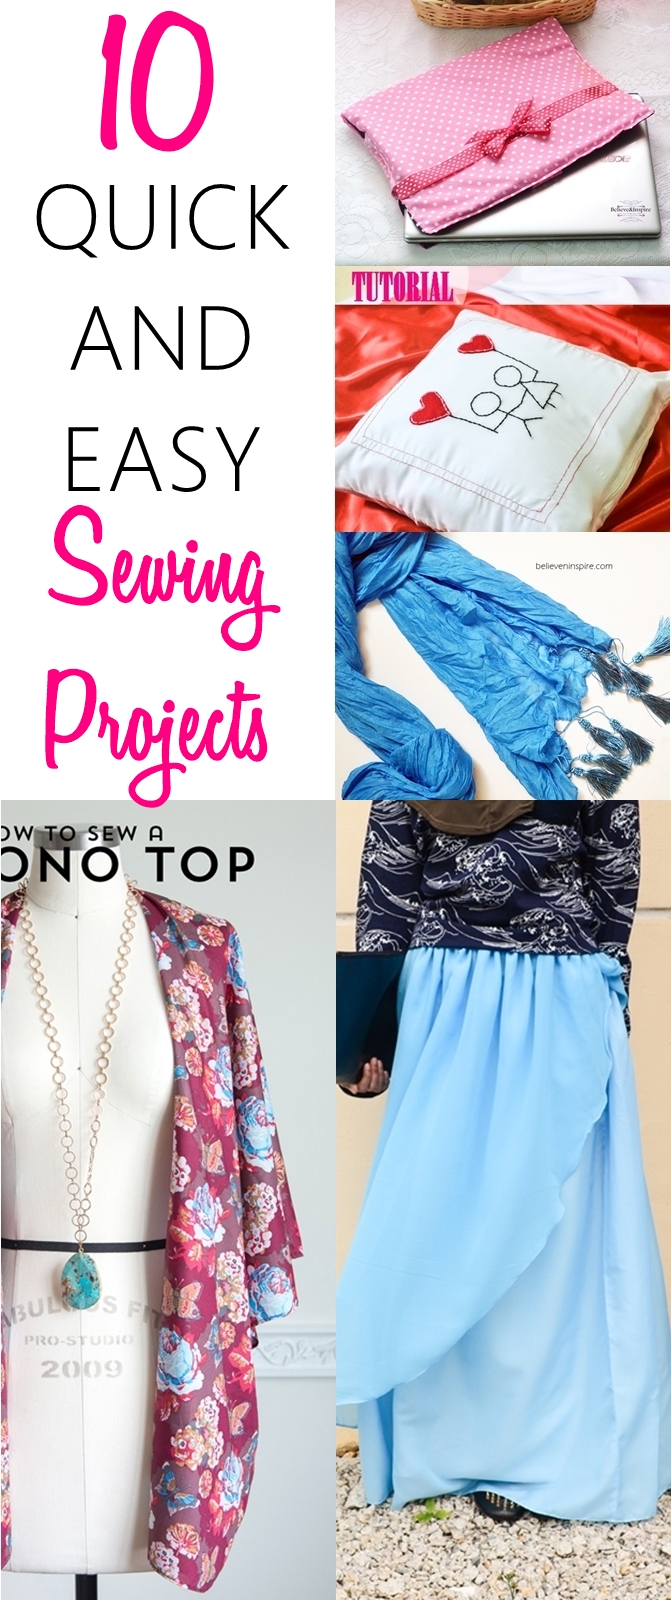 beginner sewing projects | easy to sew | sewing for beginners | quick and easy sewing projects